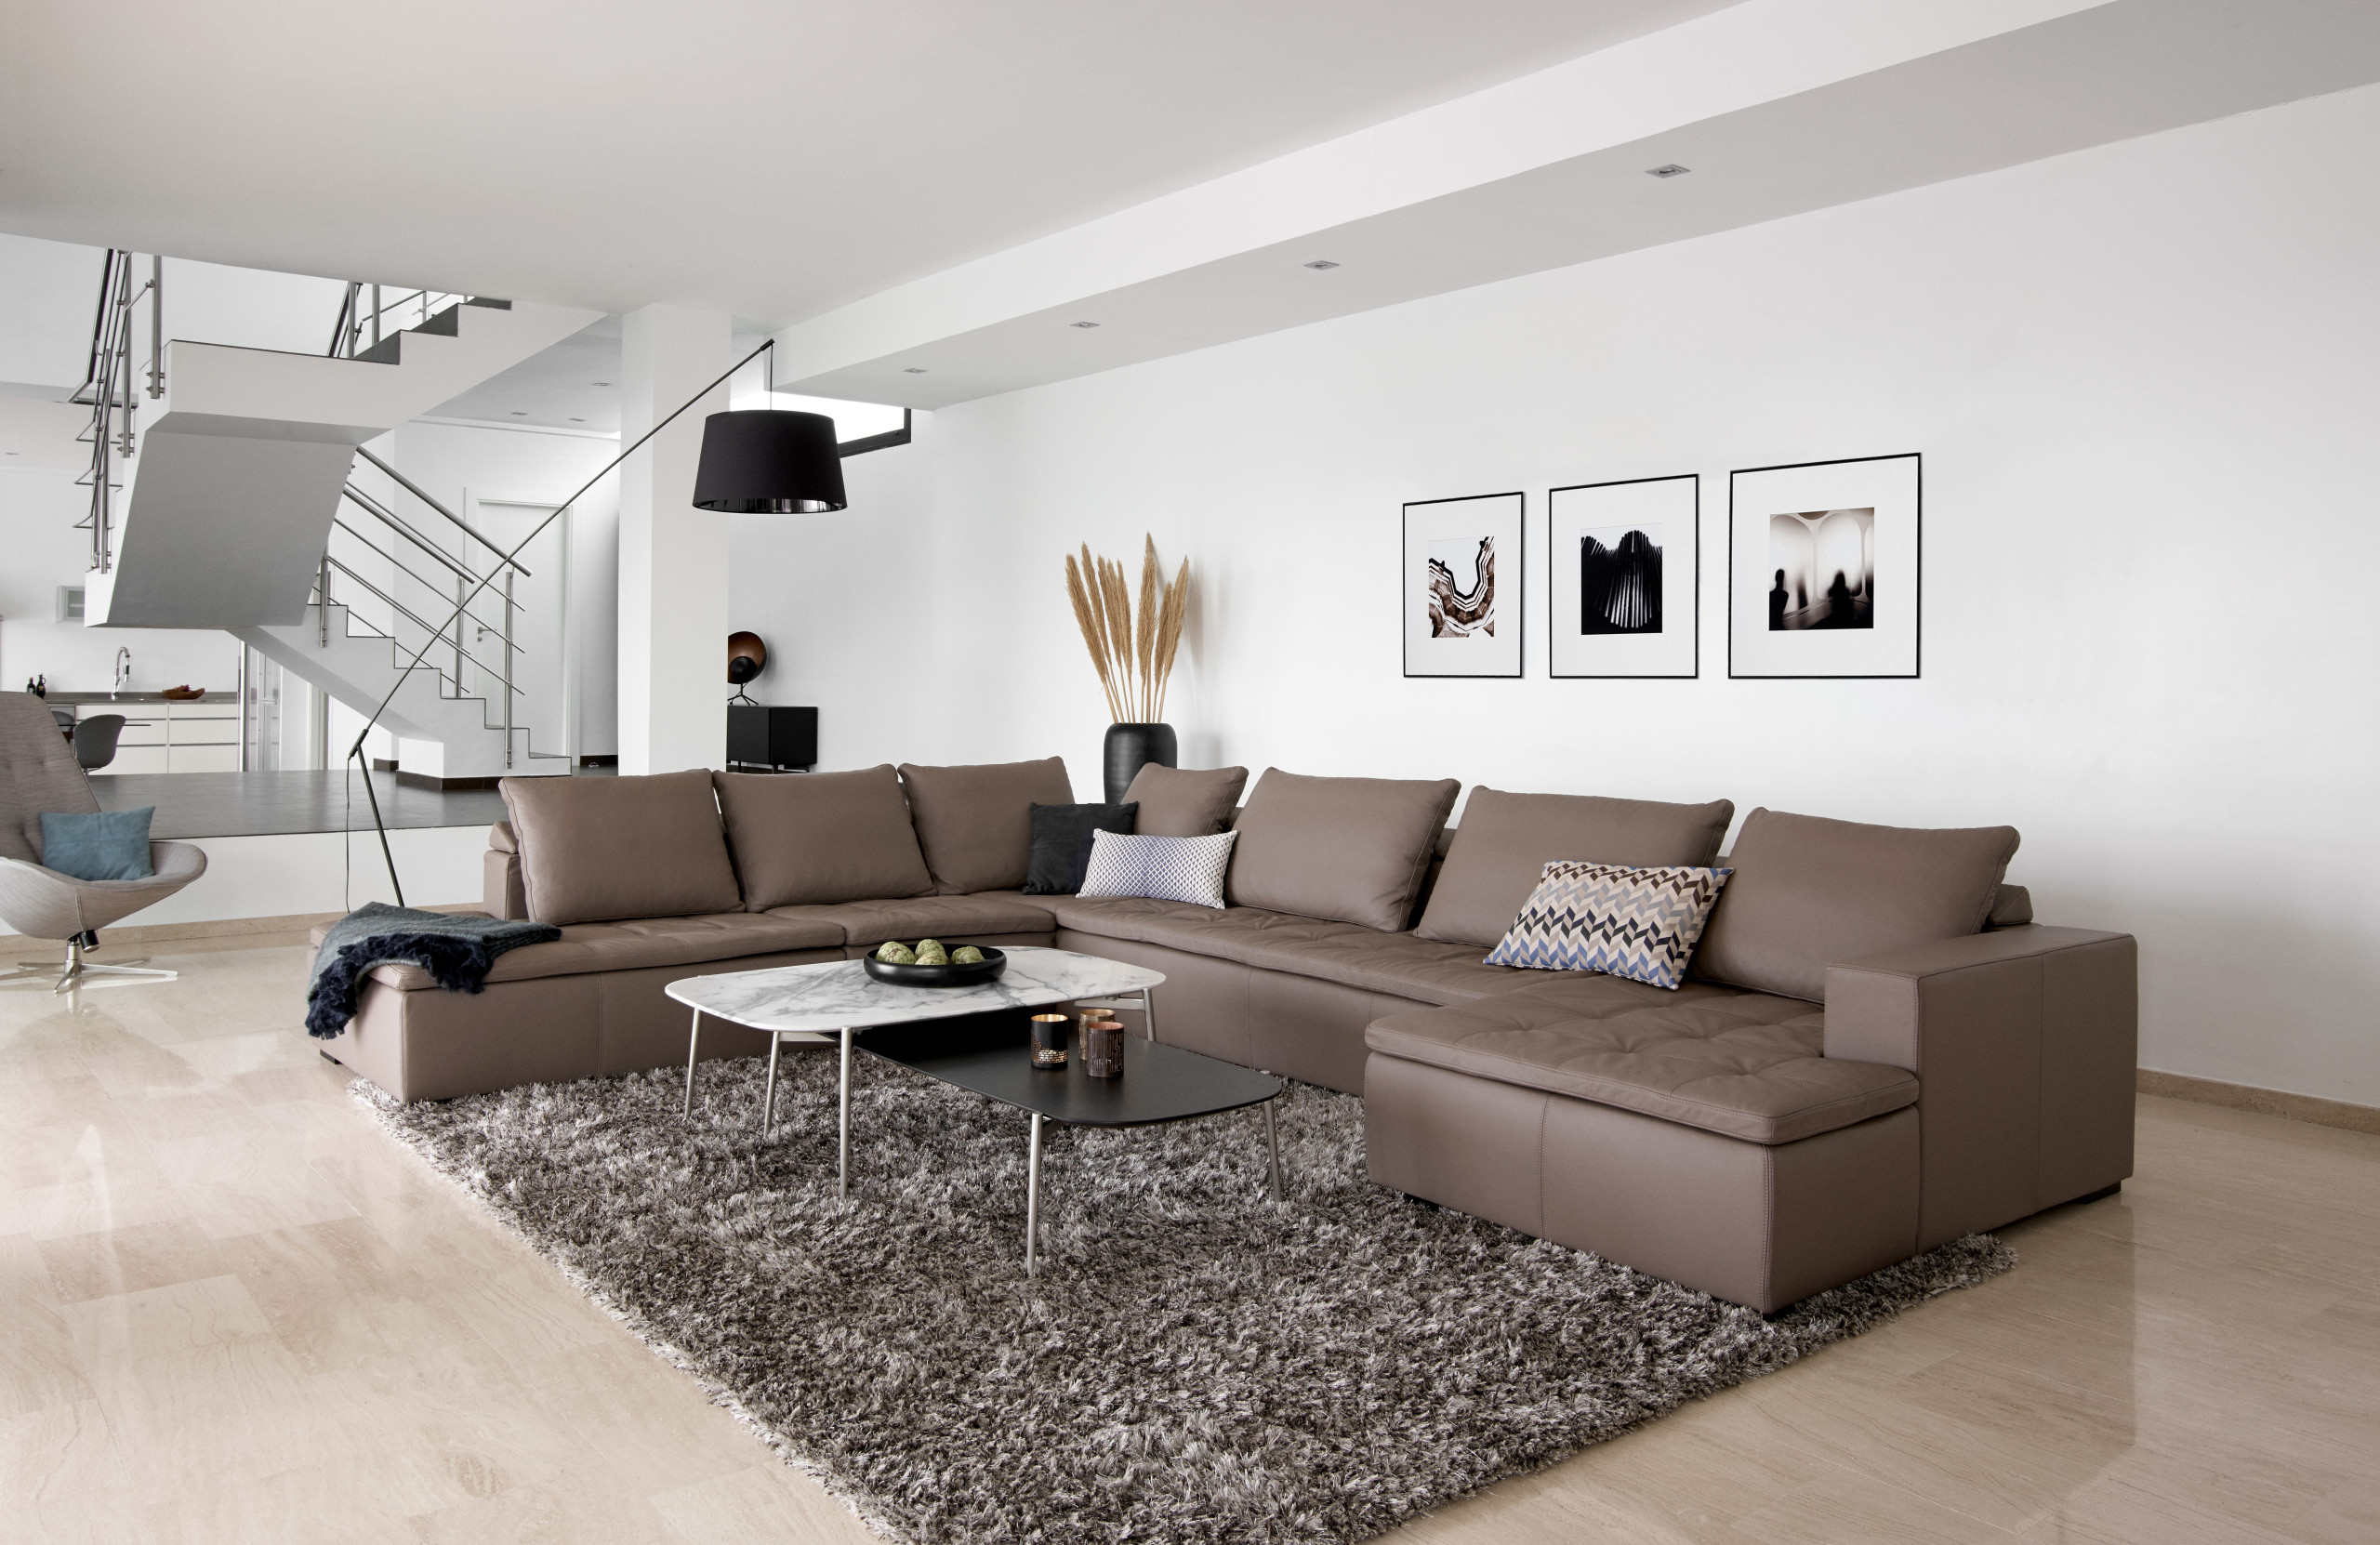 BoConcept Mezzo Corner Sofa with lounging and resting unit - Contemporary -  Living Room - Auckland - by BoConcept New Zealand | Houzz